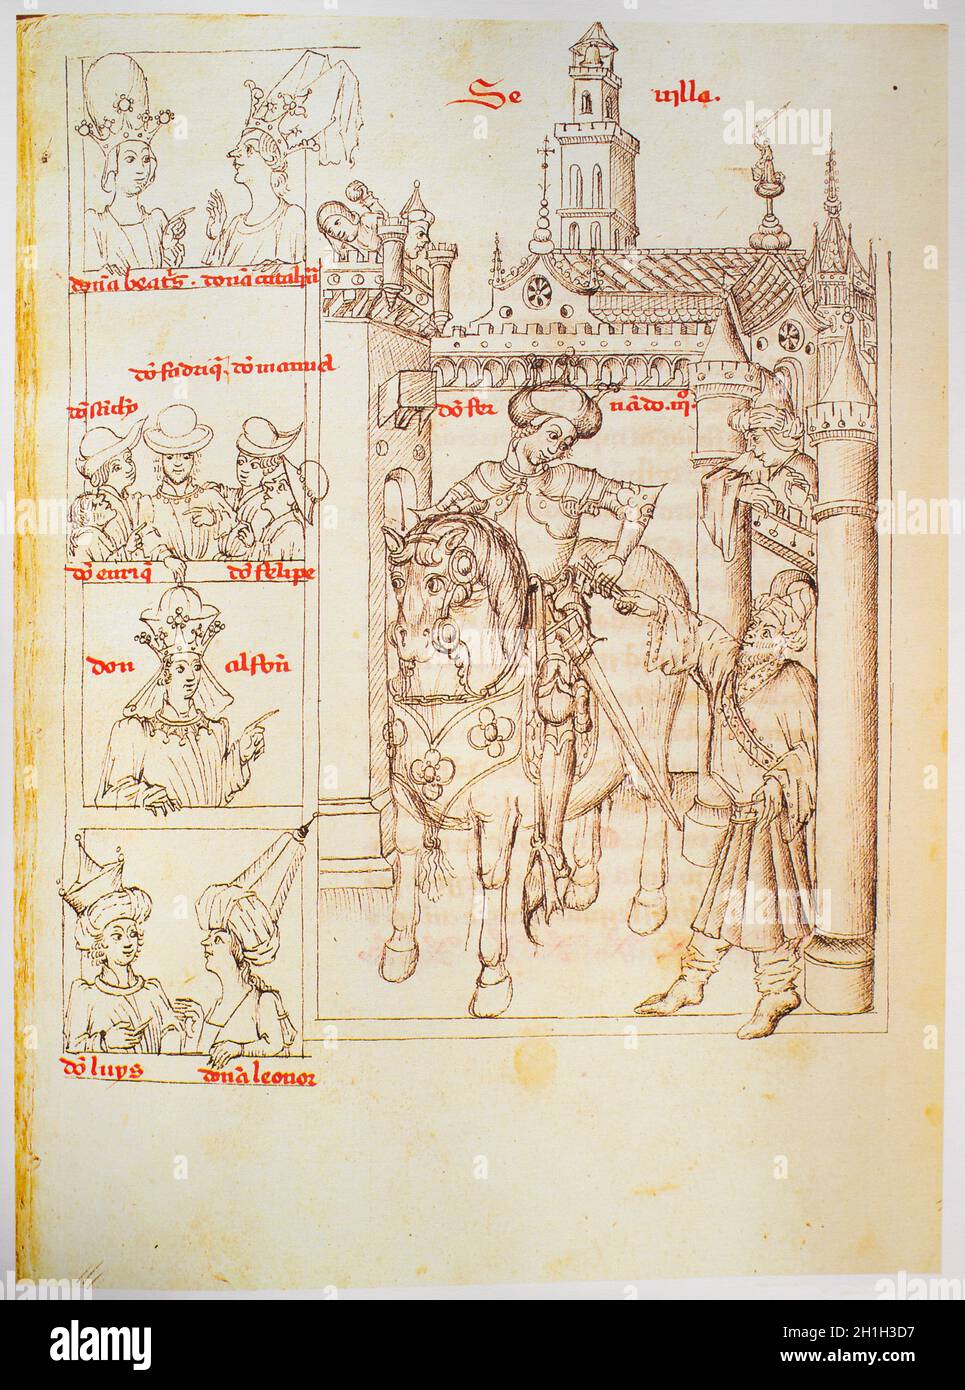 Ferdinand III of Castile at Genealogy of the Kings of Spain by Alonso de Cartagena, 1456. Royal Library of Palace, Madrid. Folio 171v Stock Photo